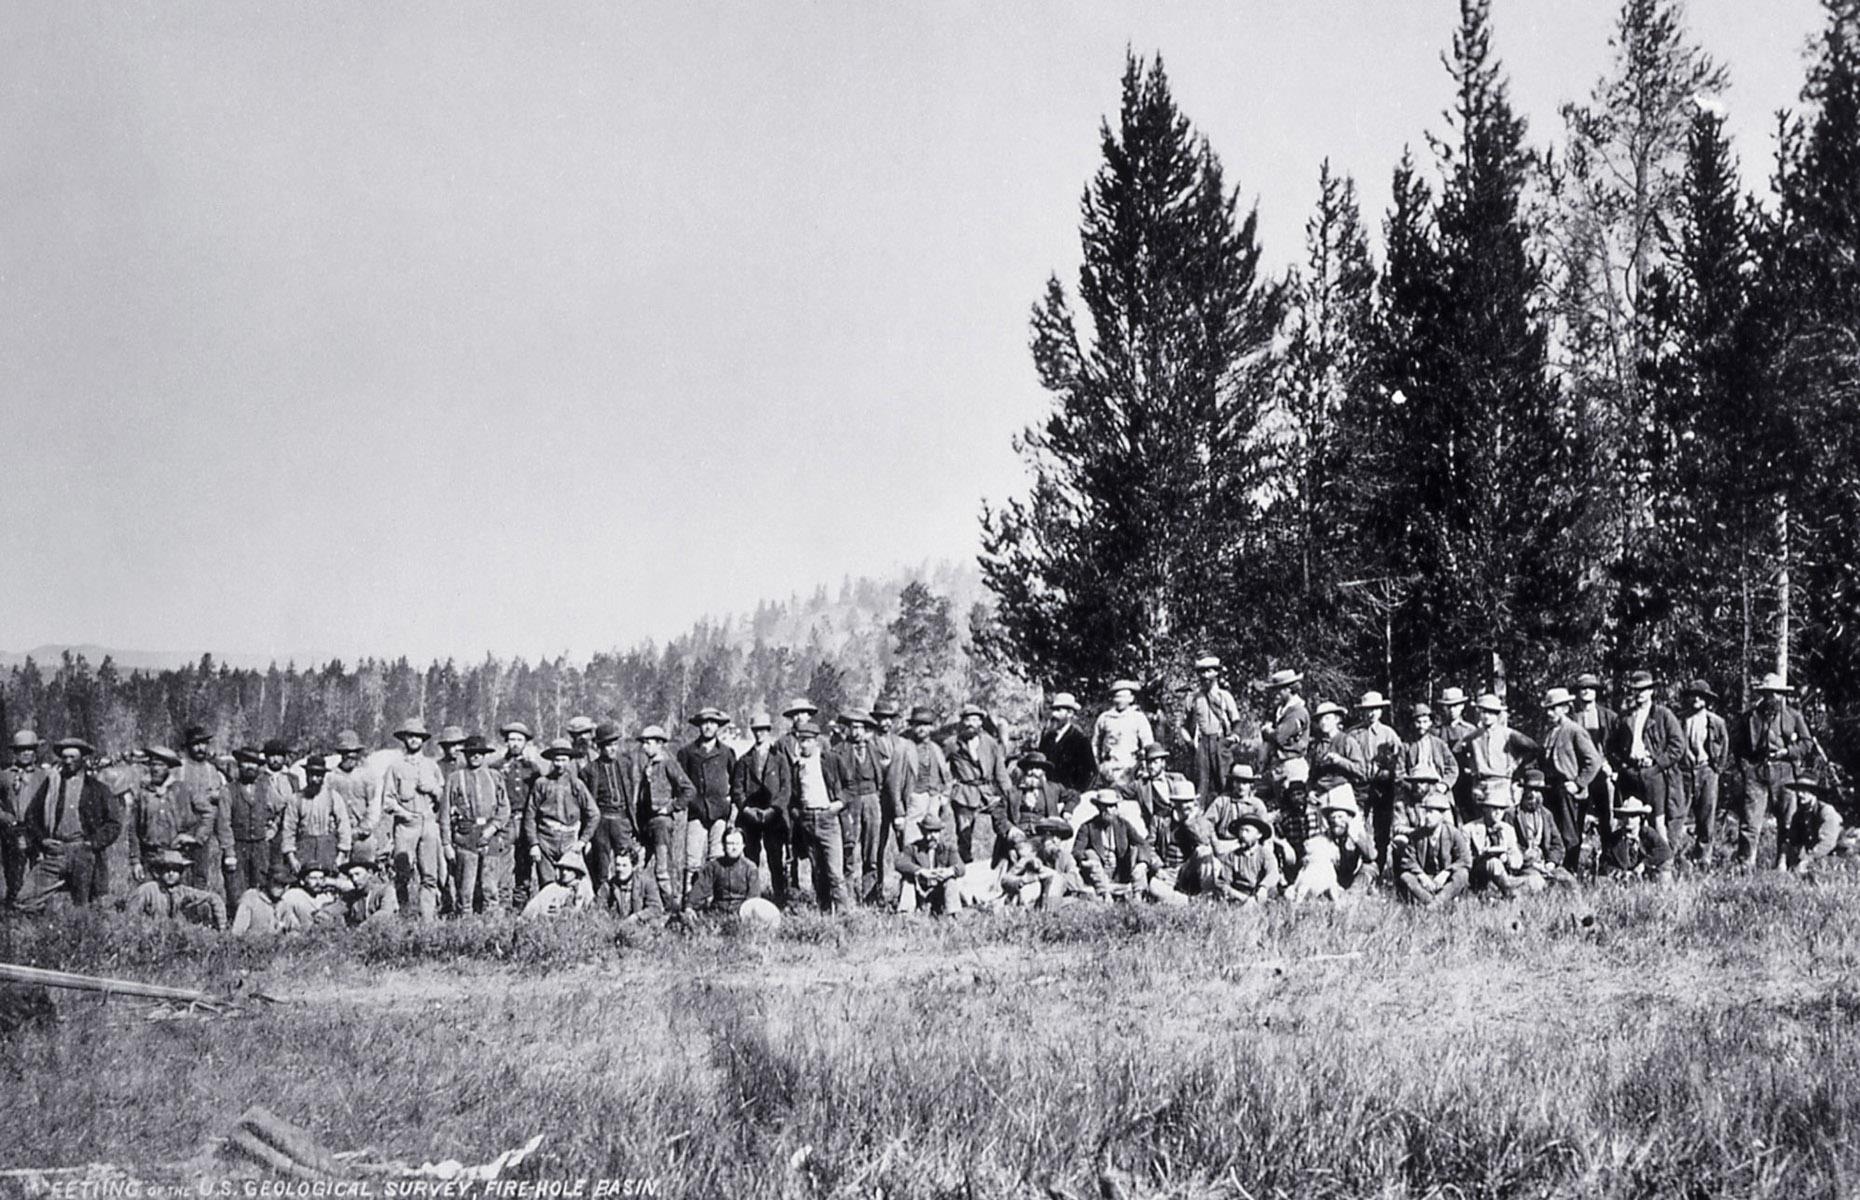 Another survey led by Hayden took place in 1872 – the team is pictured here in Firehole Basin. The United States Congress were in awe of the materials captured by these explorers, from detailed reports to breathtaking photography and artworks. President Ulysses S. Grant signed the Yellowstone National Park Protection Act on 1 March 1872 and Yellowstone became the USA's first national park.